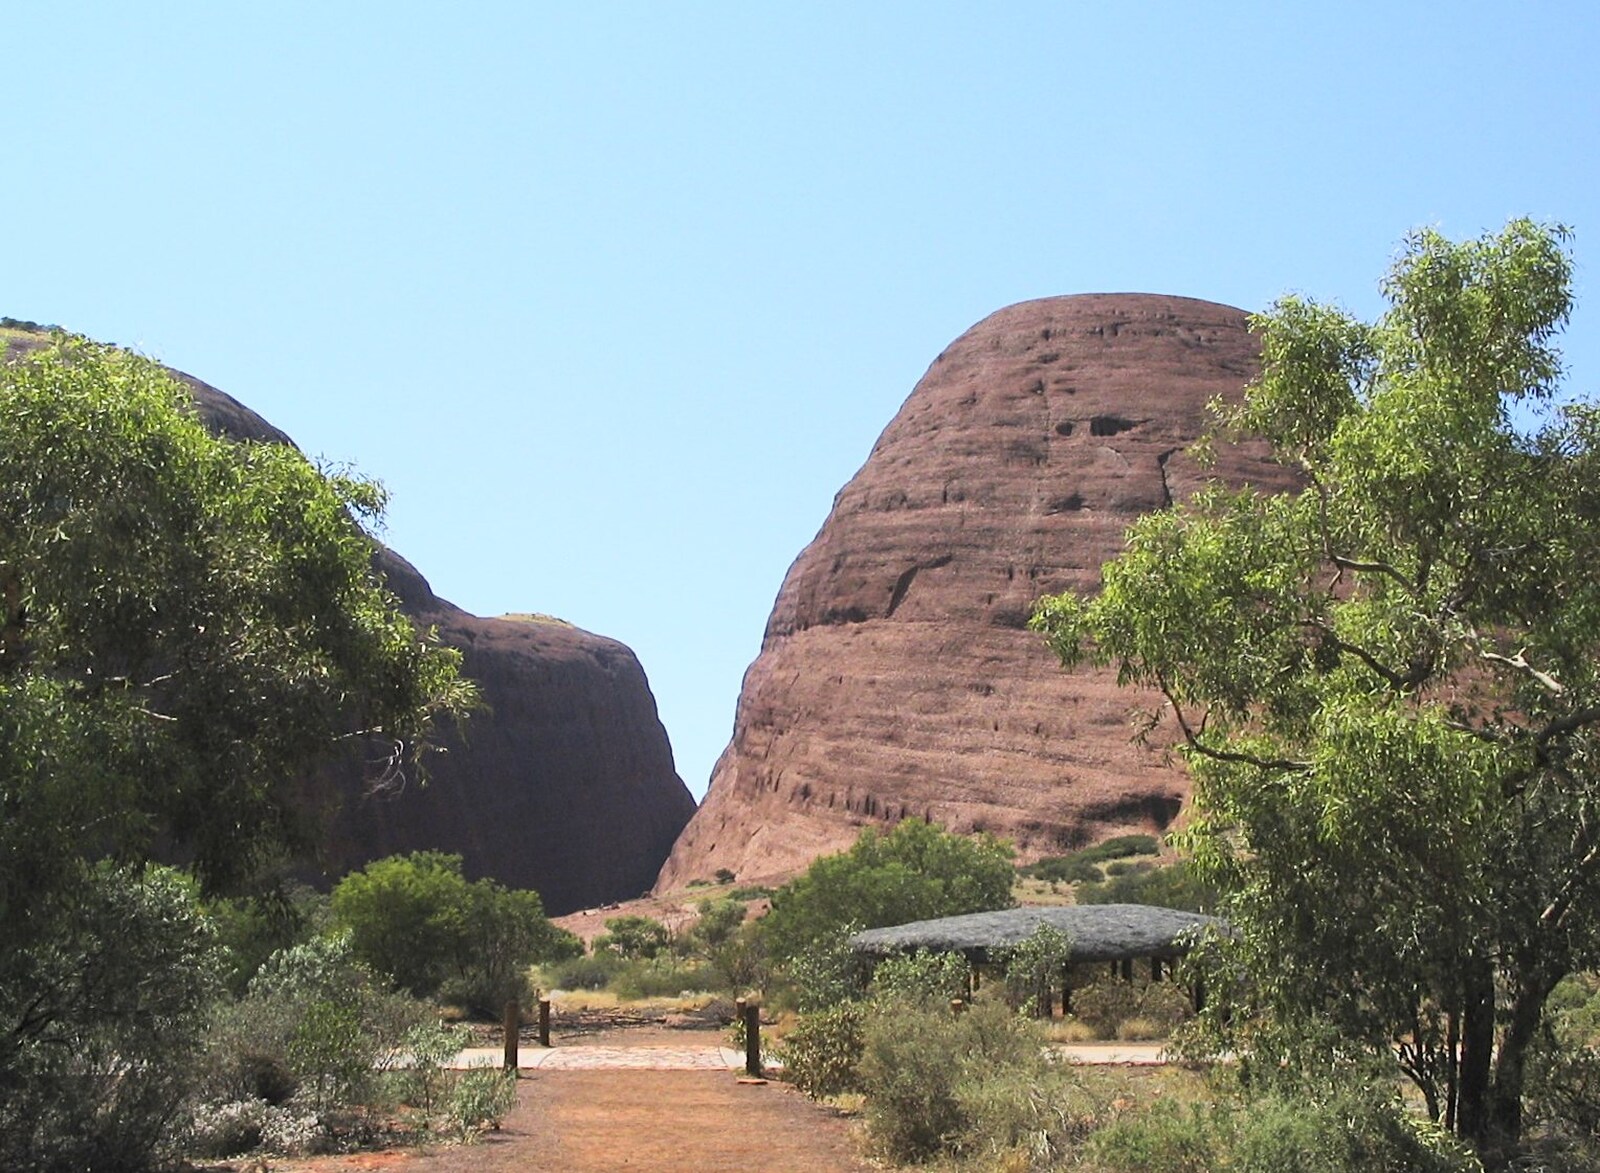 The entrance to Kata Tjuta from The Red Centre: Yulara and Uluru, Northern Territories, Australia - 8th October 2004